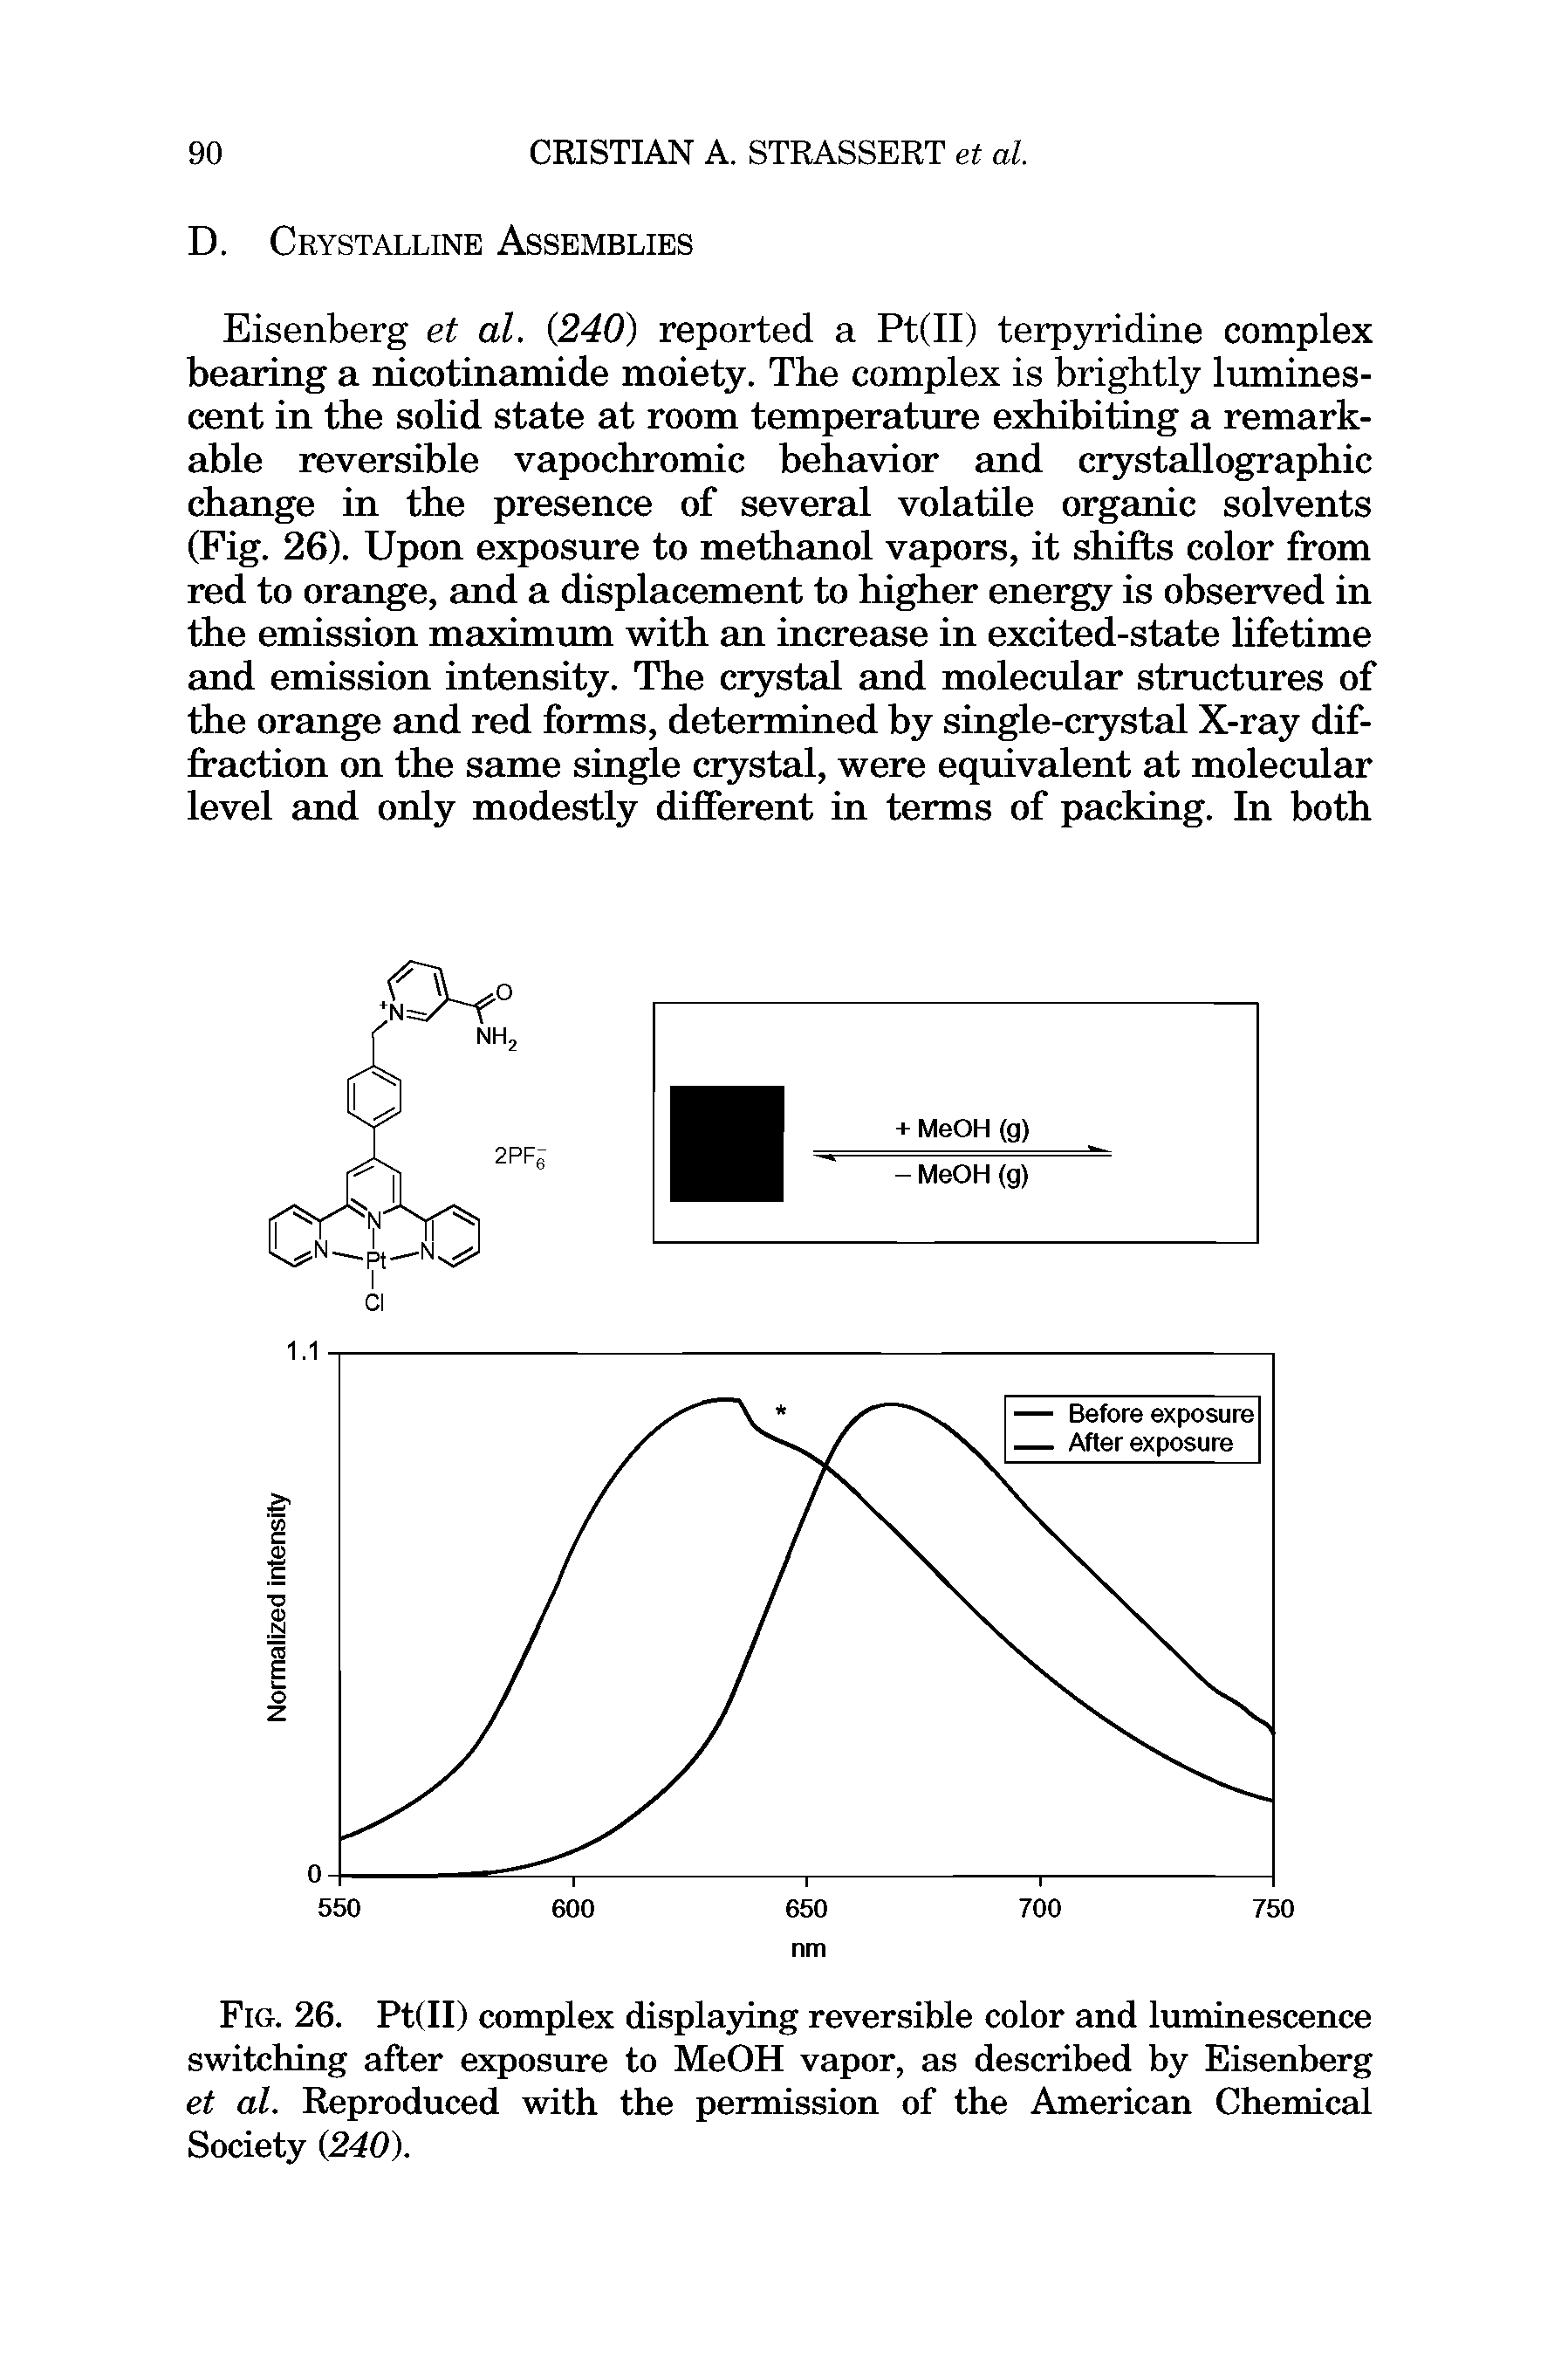 Fig. 26. Pt(II) complex displaying reversible color and luminescence switching after exposure to MeOH vapor, as described by Eisenberg et al. Reproduced with the permission of the American Chemical Society 240).